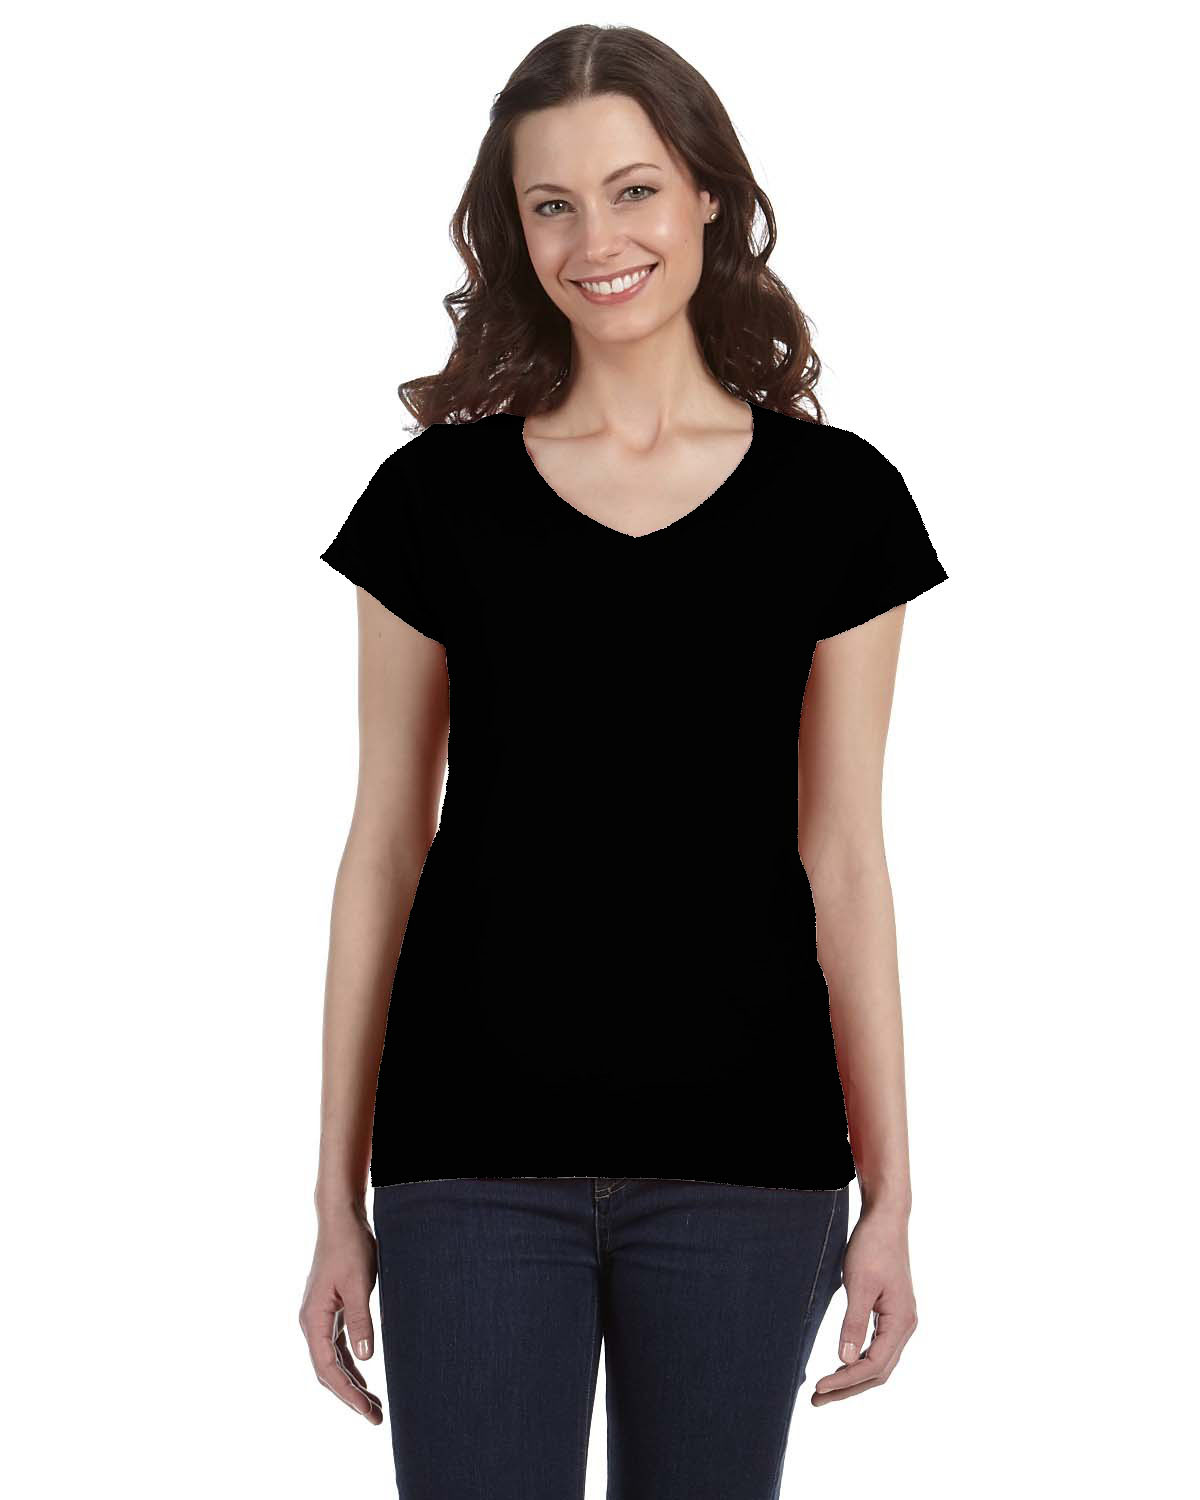 Gildan Ladies' SoftStyle® Fitted V-Neck T-Shirt | G64VL